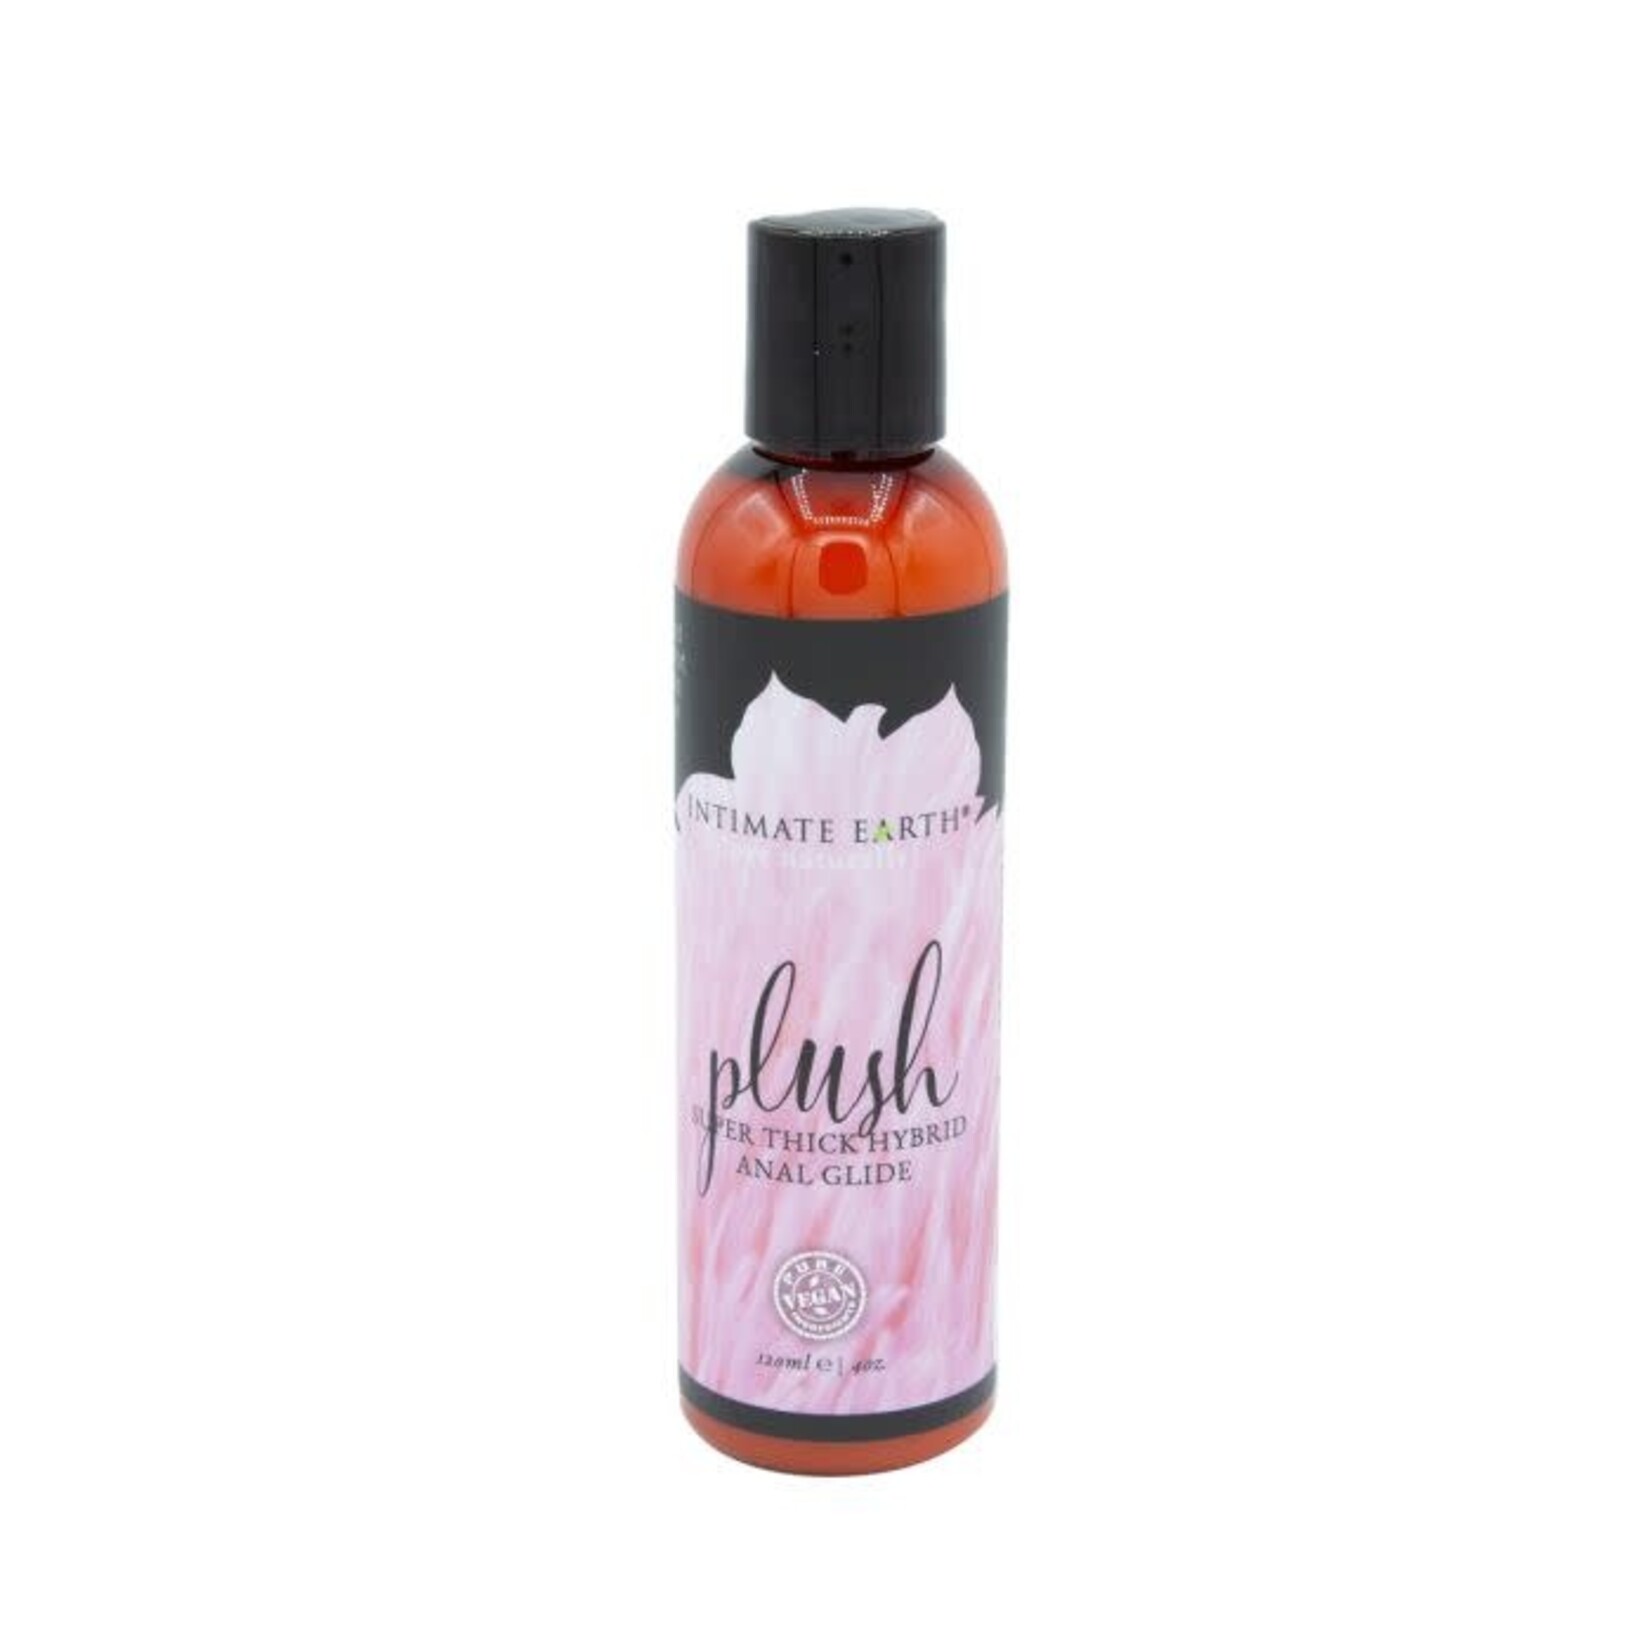 INTIMATE EARTH INTIMATE EARTH - PLUSH SUPER THICK HYBRID ANAL GLIDE - 120 ML / 4 OZ.